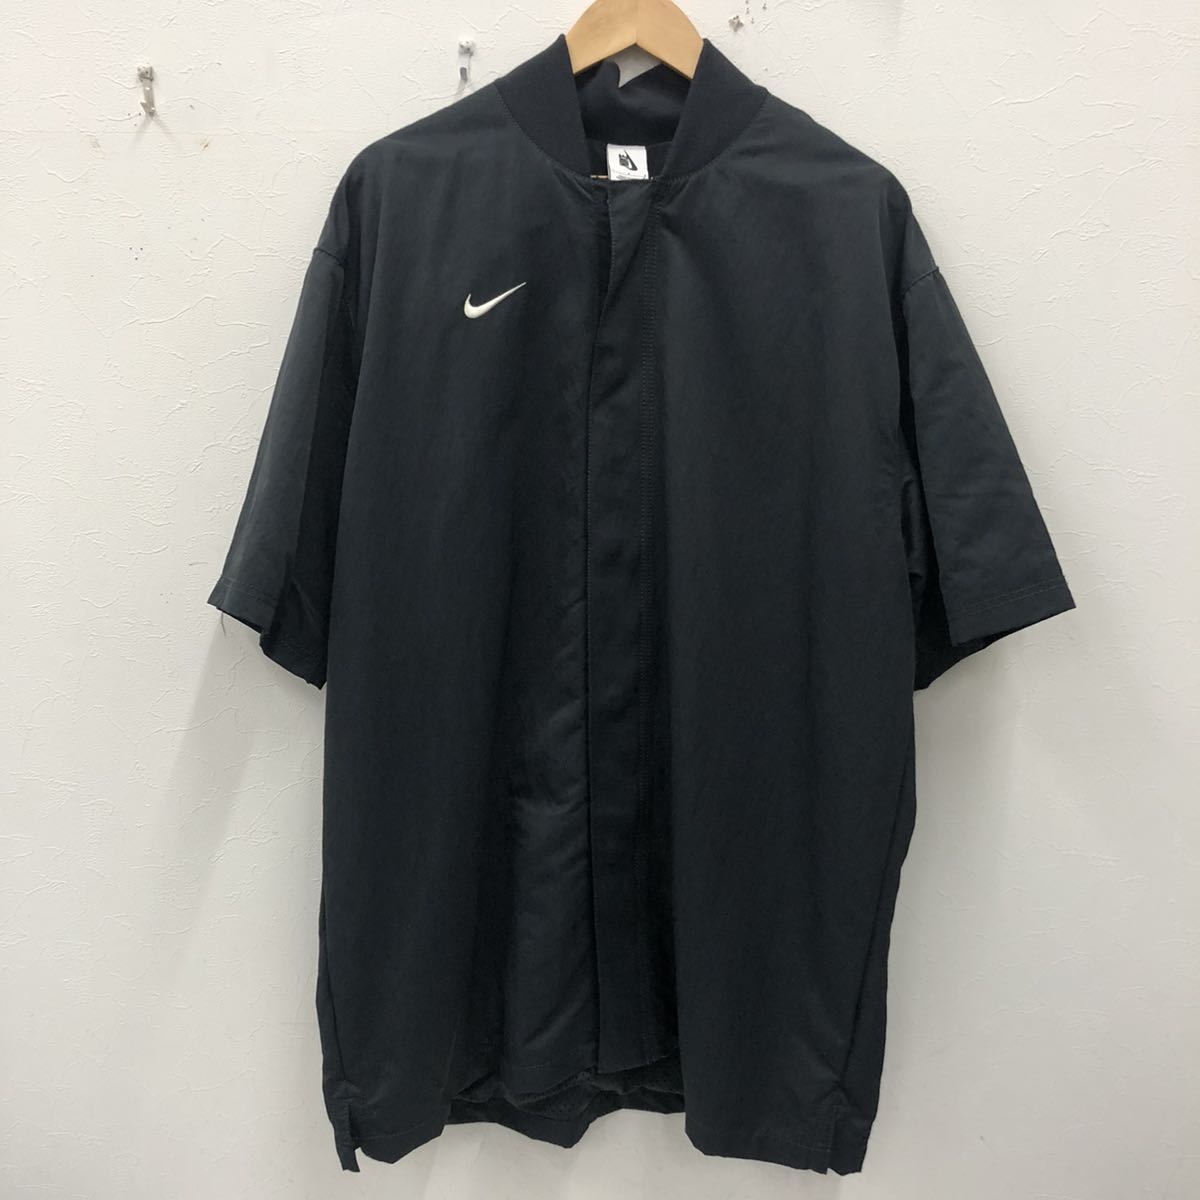 NIKE ナイキ トップス ナイロン素材 BLKブラック黒 無地 20aw wormup top cu4886-101 Lサイズ